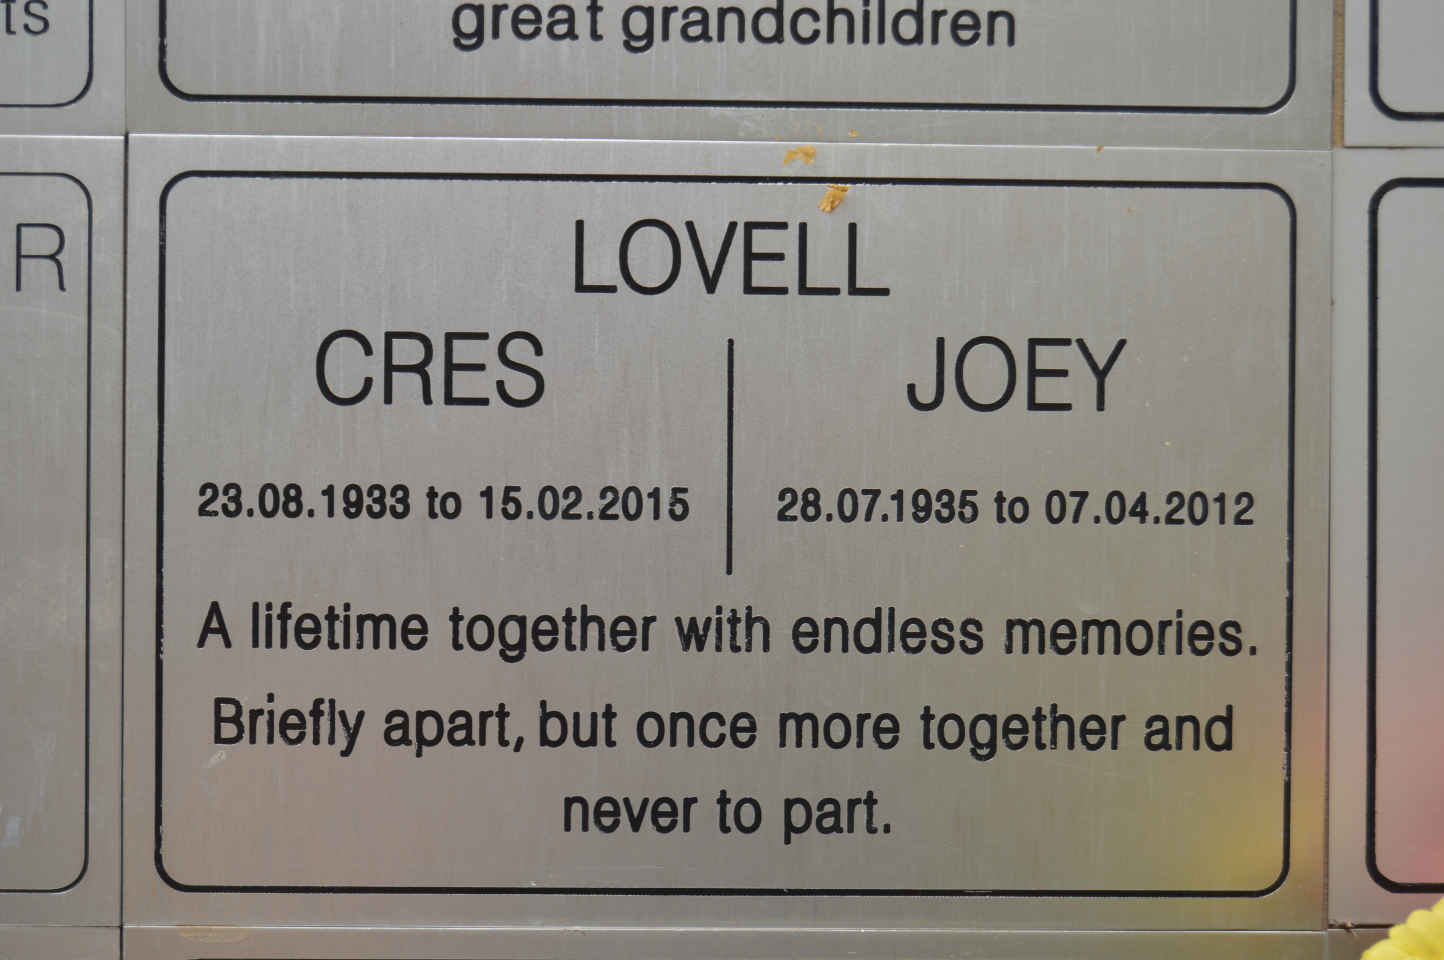 LOVELL Cres 1933-2015 & Joey 1935-2012